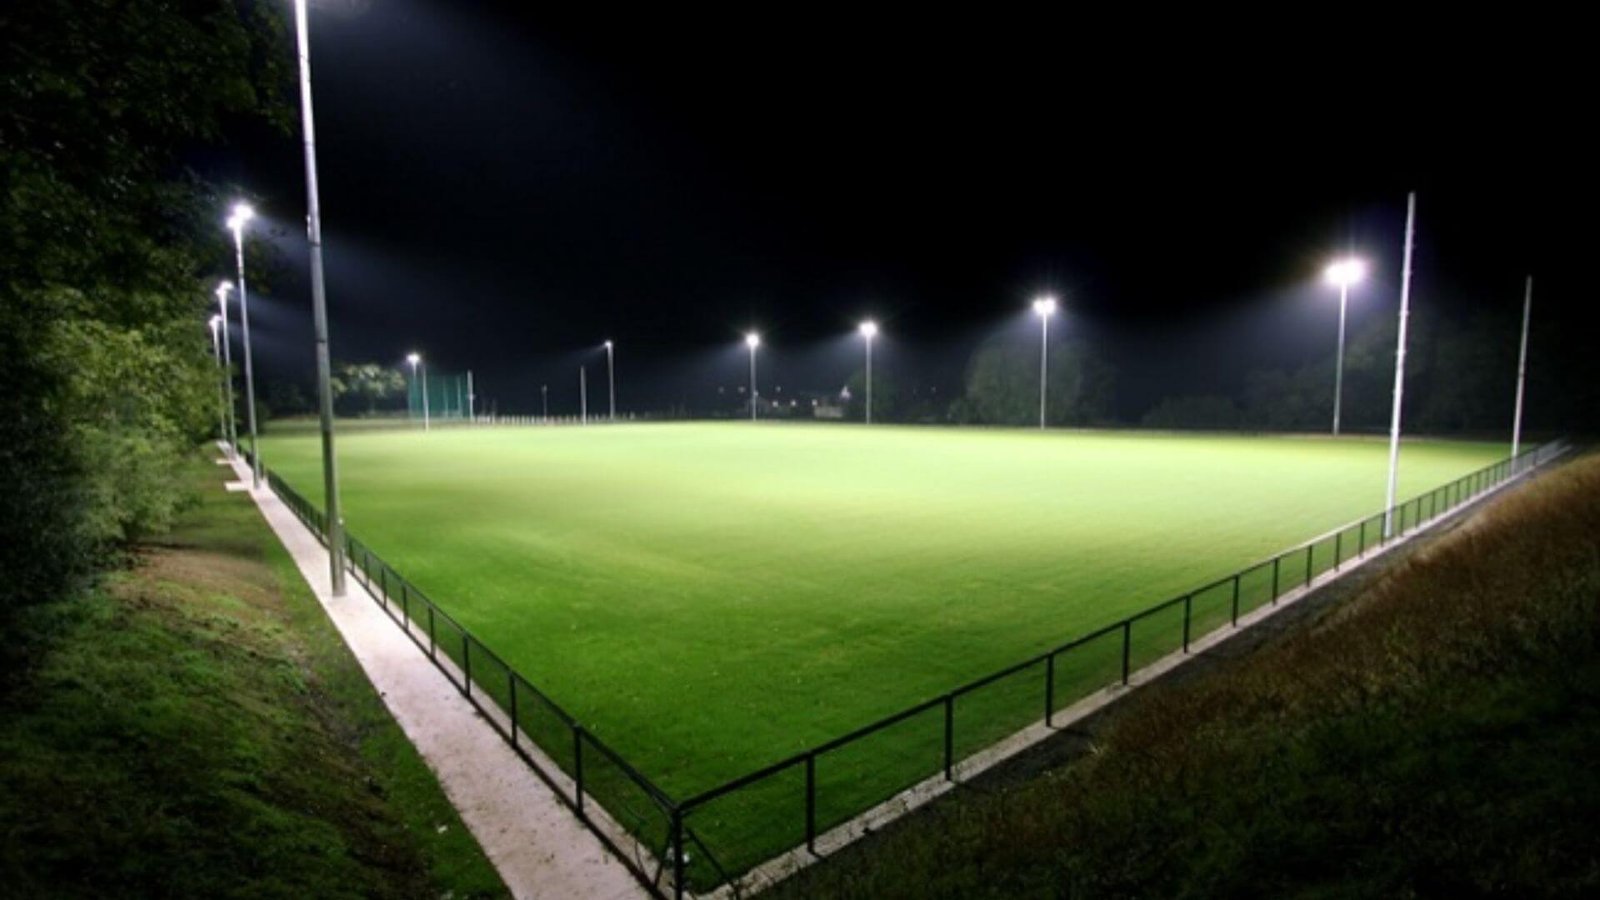 How LED Lighting from Leizur Improves Visibility on the Field 